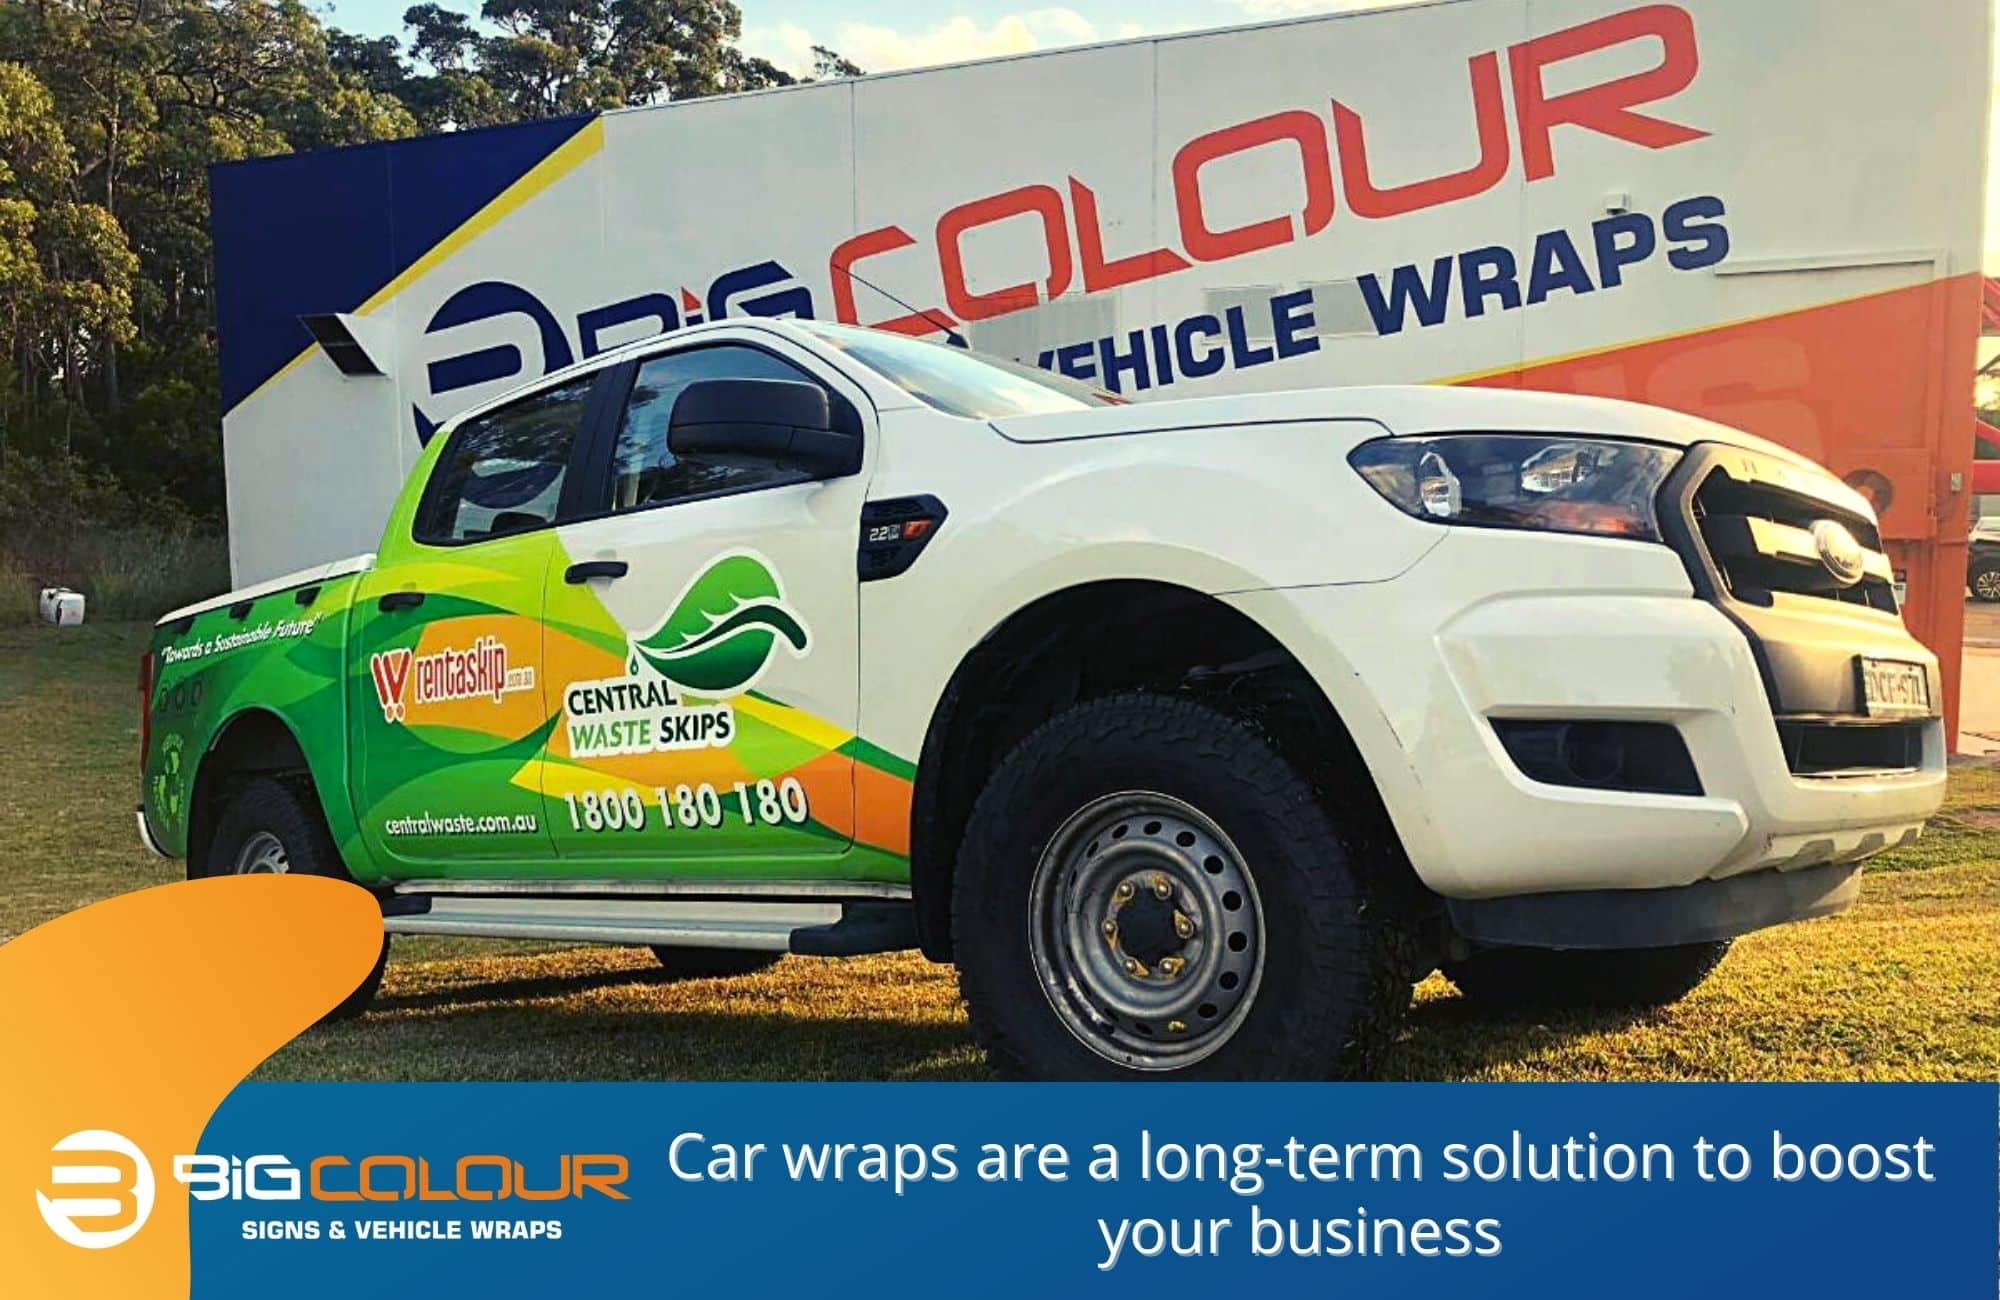 Car wraps are a long-term solution to boost your business